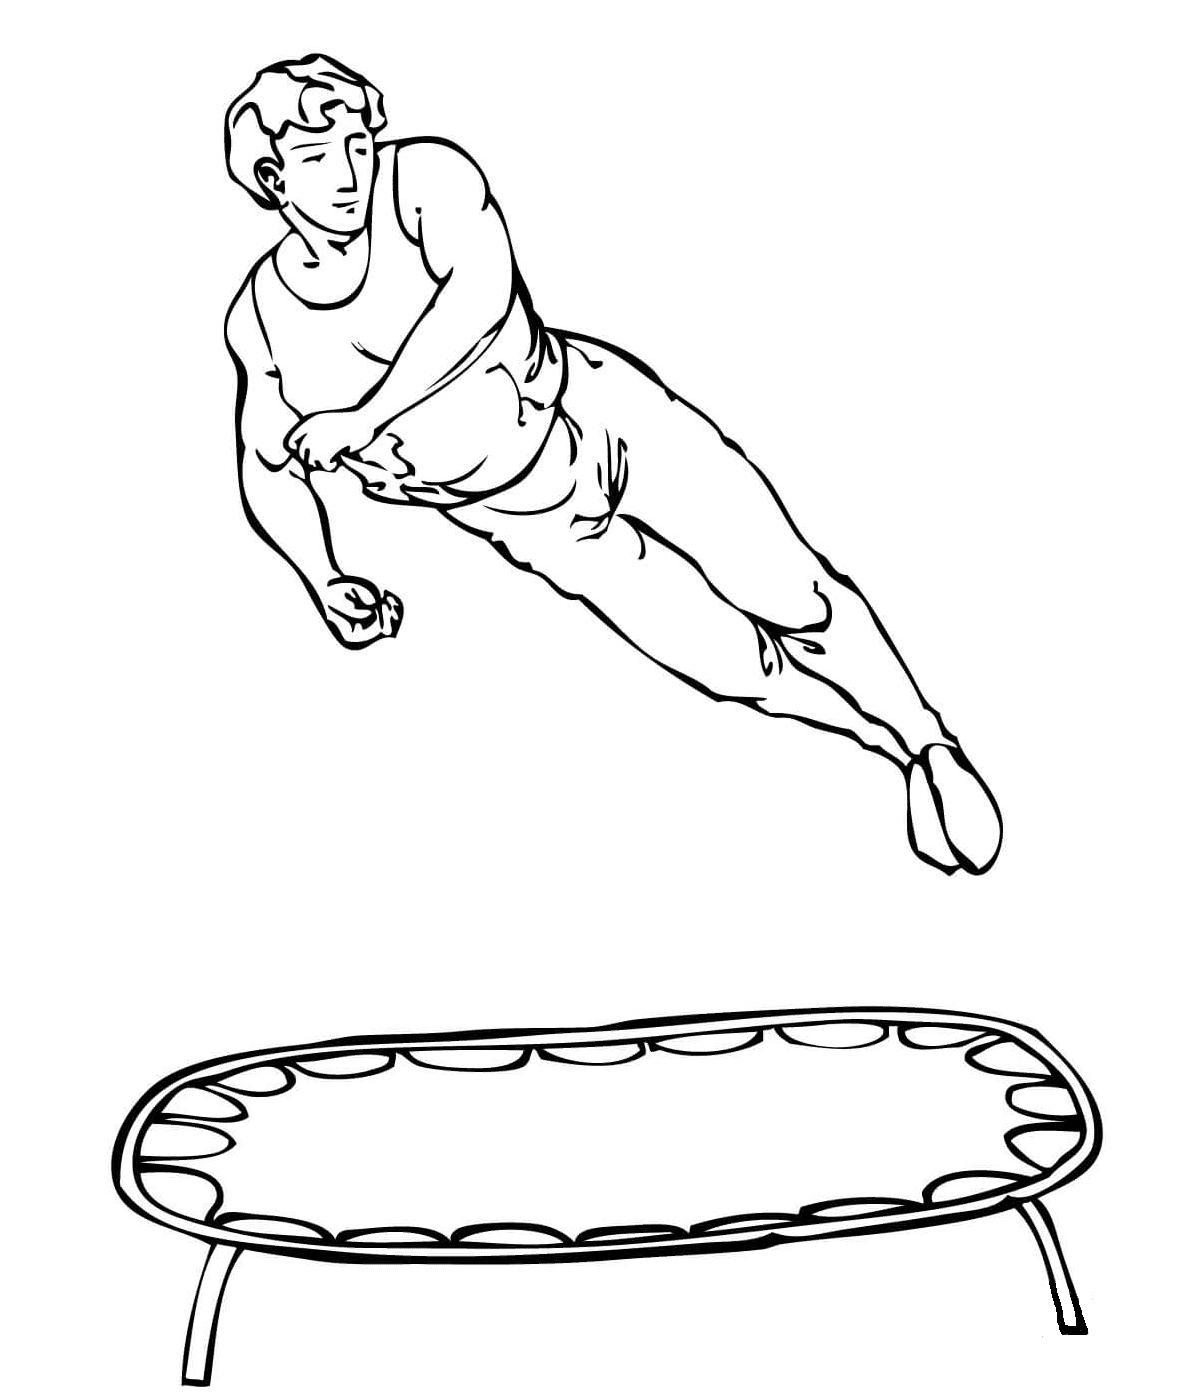 athlete on trampoline coloring pages